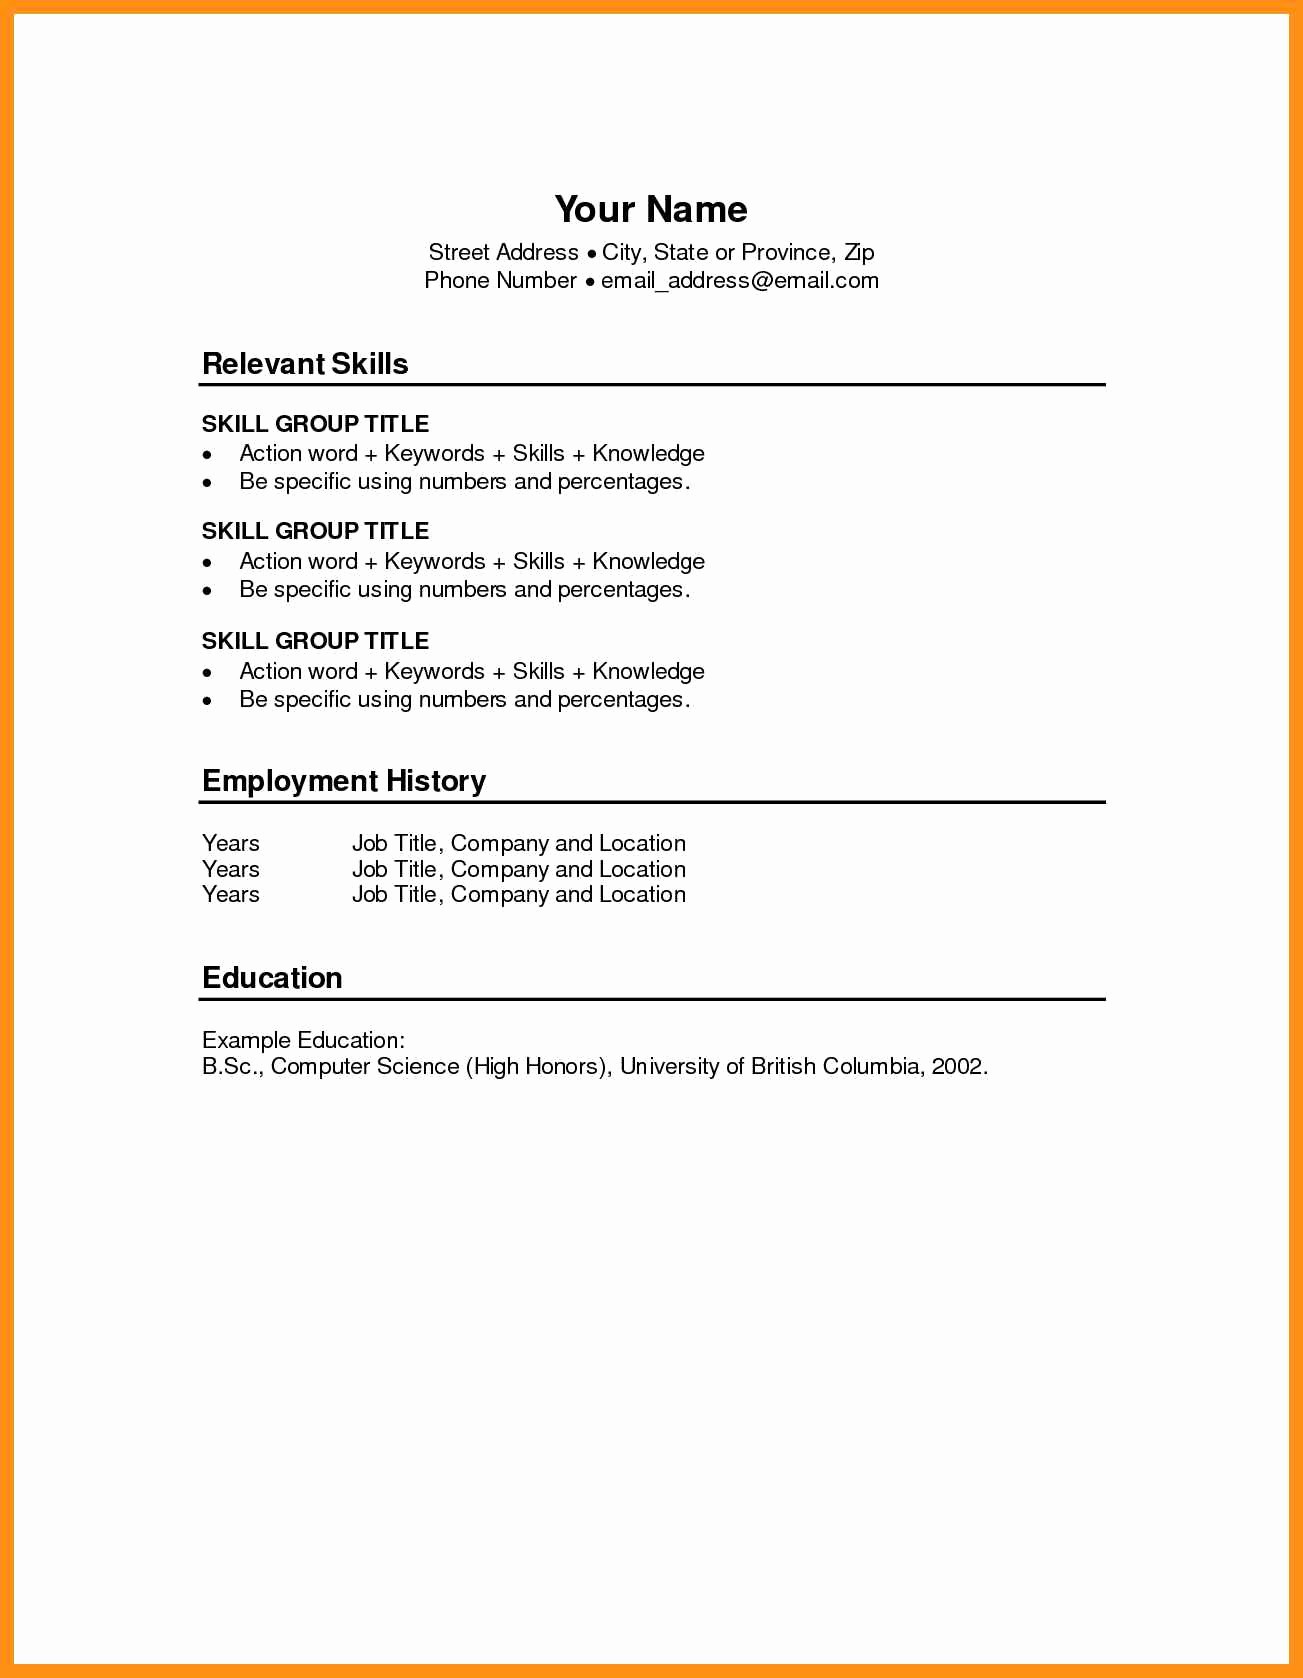 Microsoft Word 2003 Resume Templates New Resume Templates for Word 2010